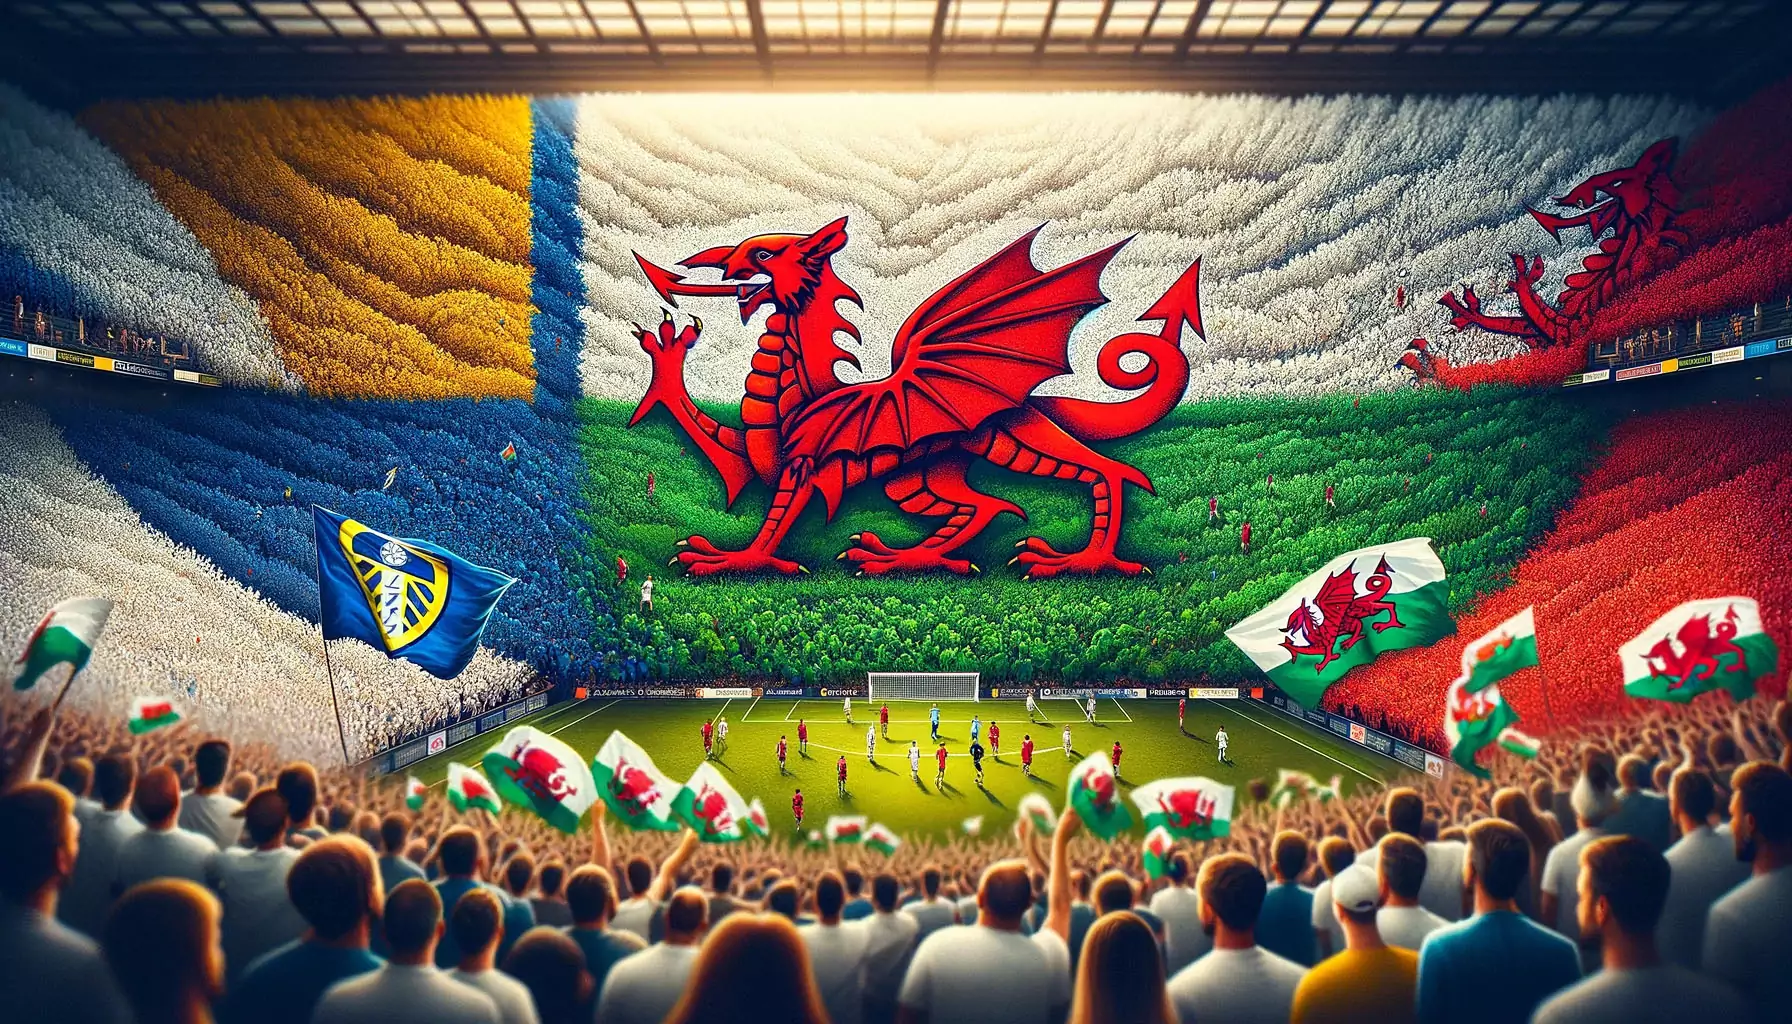 An image that combines the Leeds United and Wales flags, set against a backdrop of subtly blurred football fans